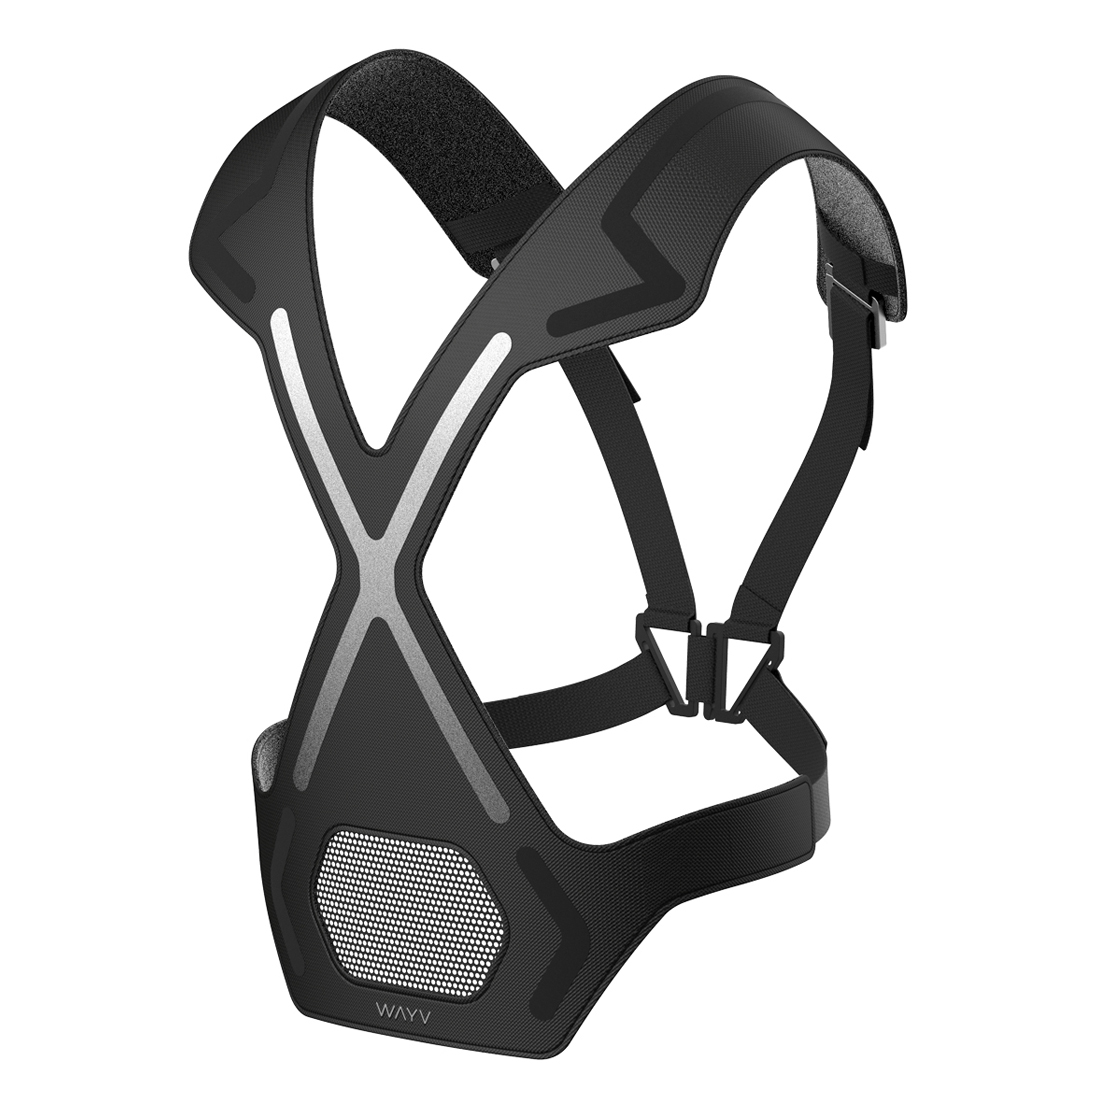 WAYV wearable harness with front and back indicators